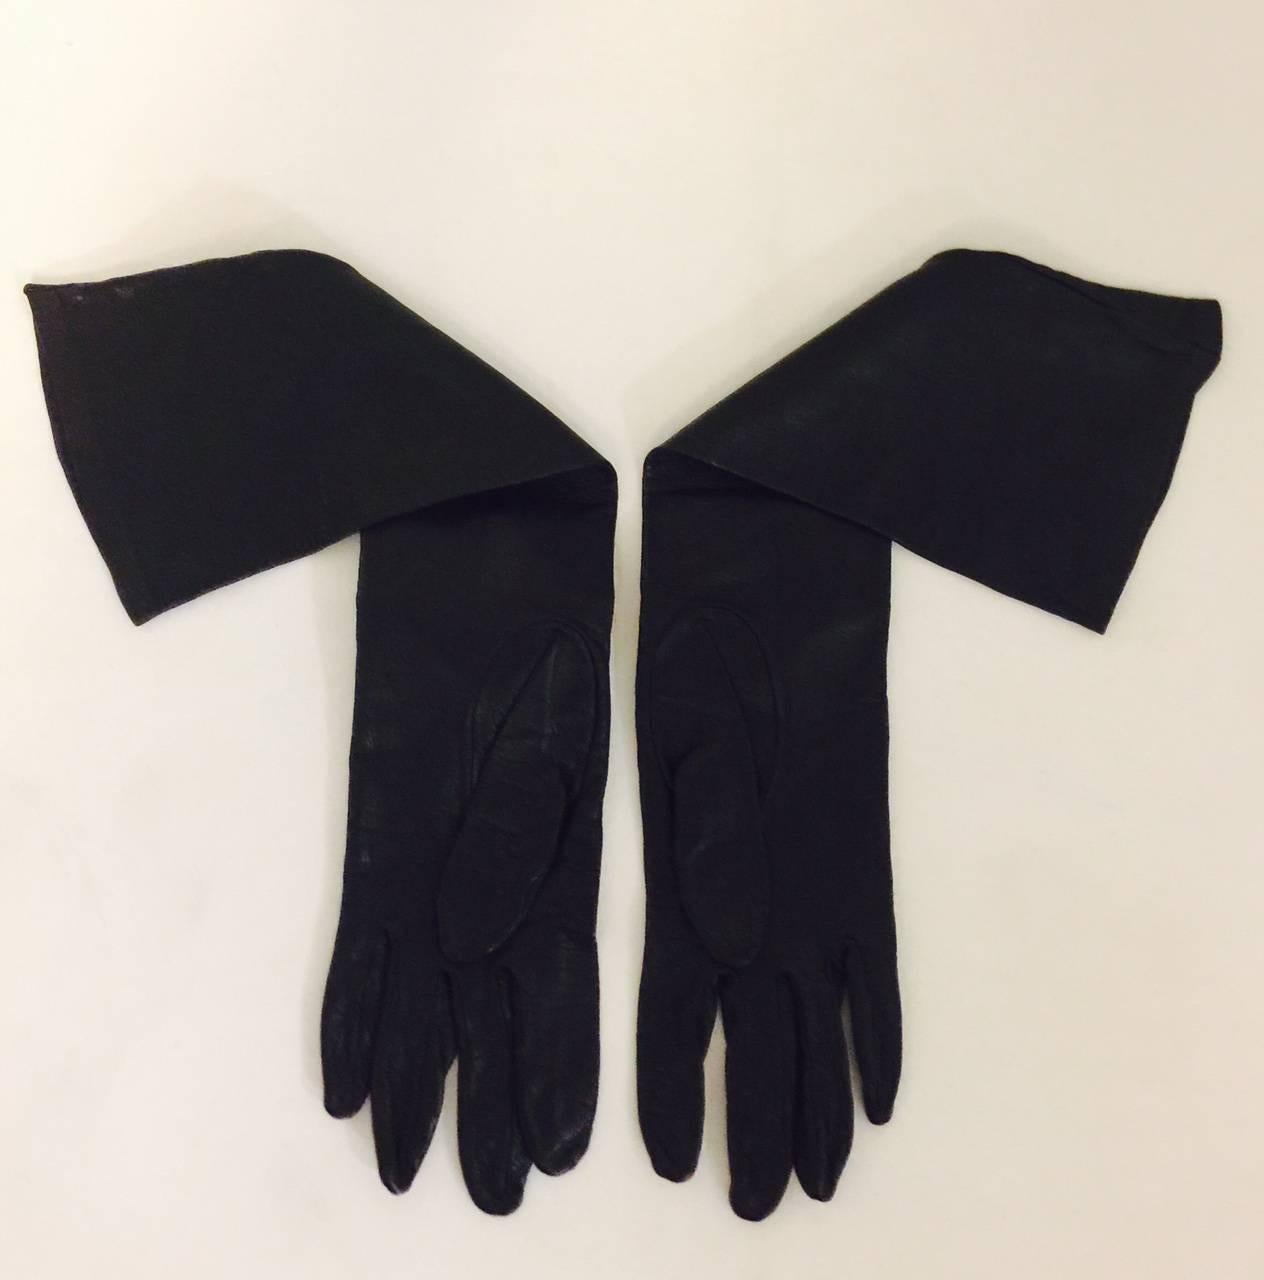 Chanel Black Kidskin Gloves With Geometric Pink Stingray Lined Cutout - Size 7 In Good Condition For Sale In Palm Beach, FL